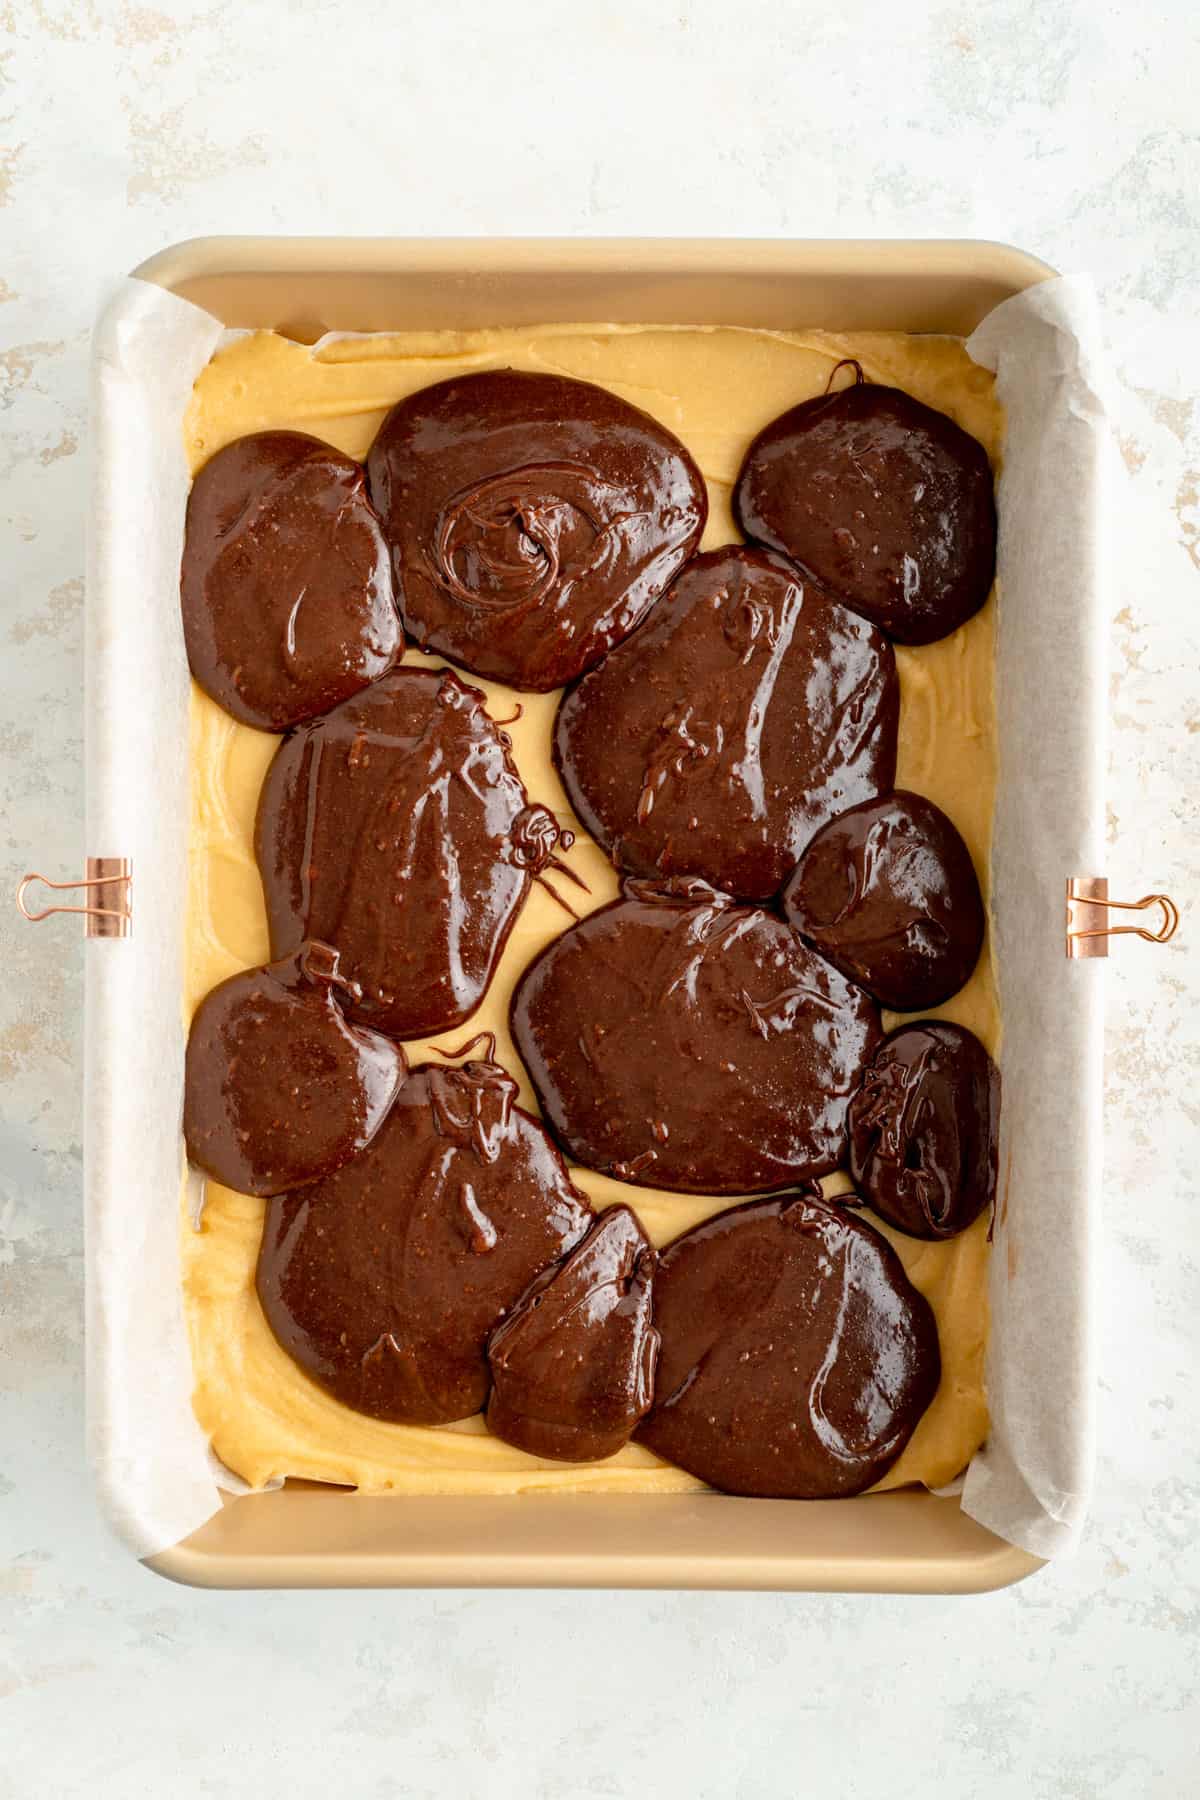 Blondie batter in Gold pan with large spoonfuls of brownie batter on top.